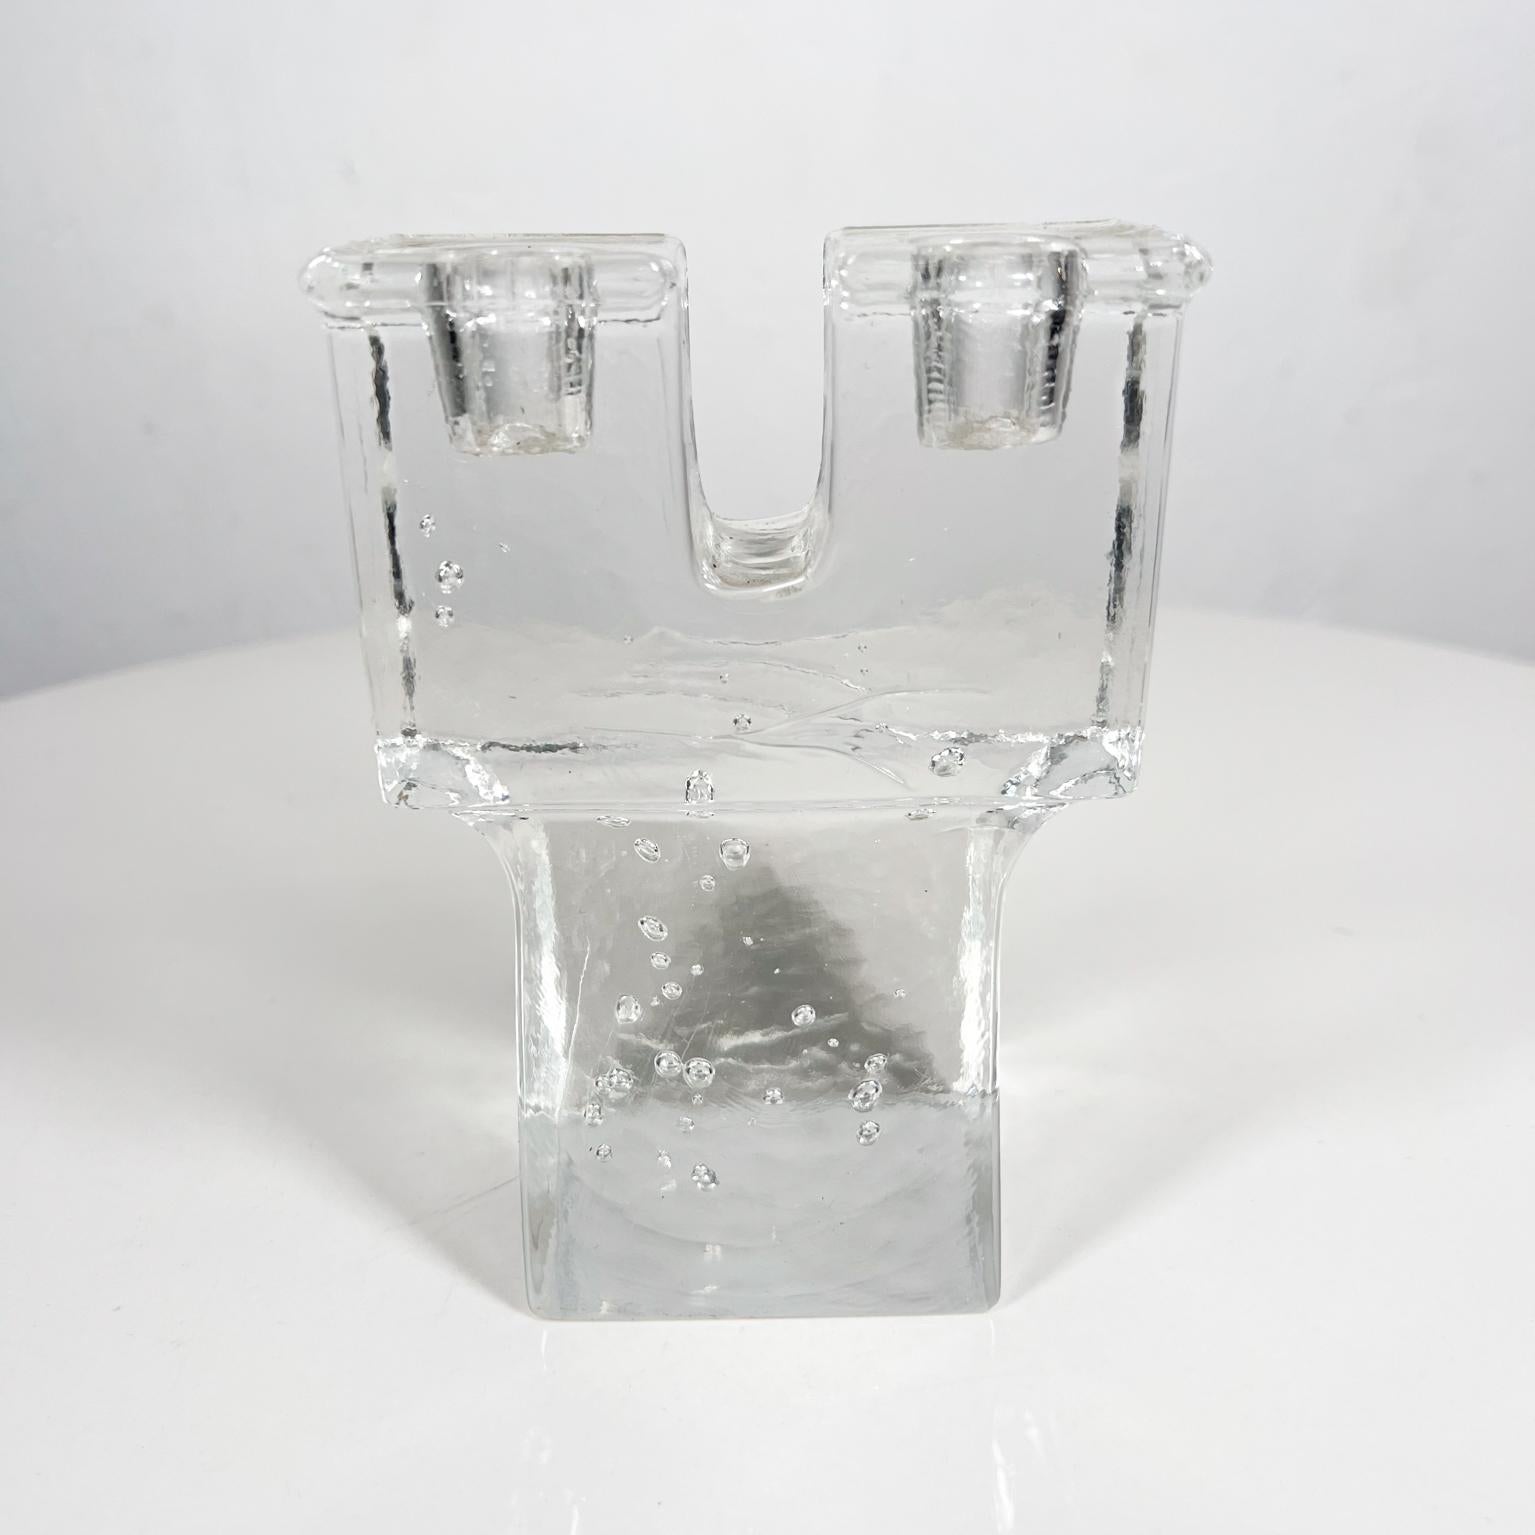 Modern Art Glass Tower Dual Candle Holder Mikasa Walther West Germany 
Crystal Ice Glass with controlled Bubbles.
3.88 w x 2.5 d x 5.38 h
Preowned vintage condition
See images provided.


